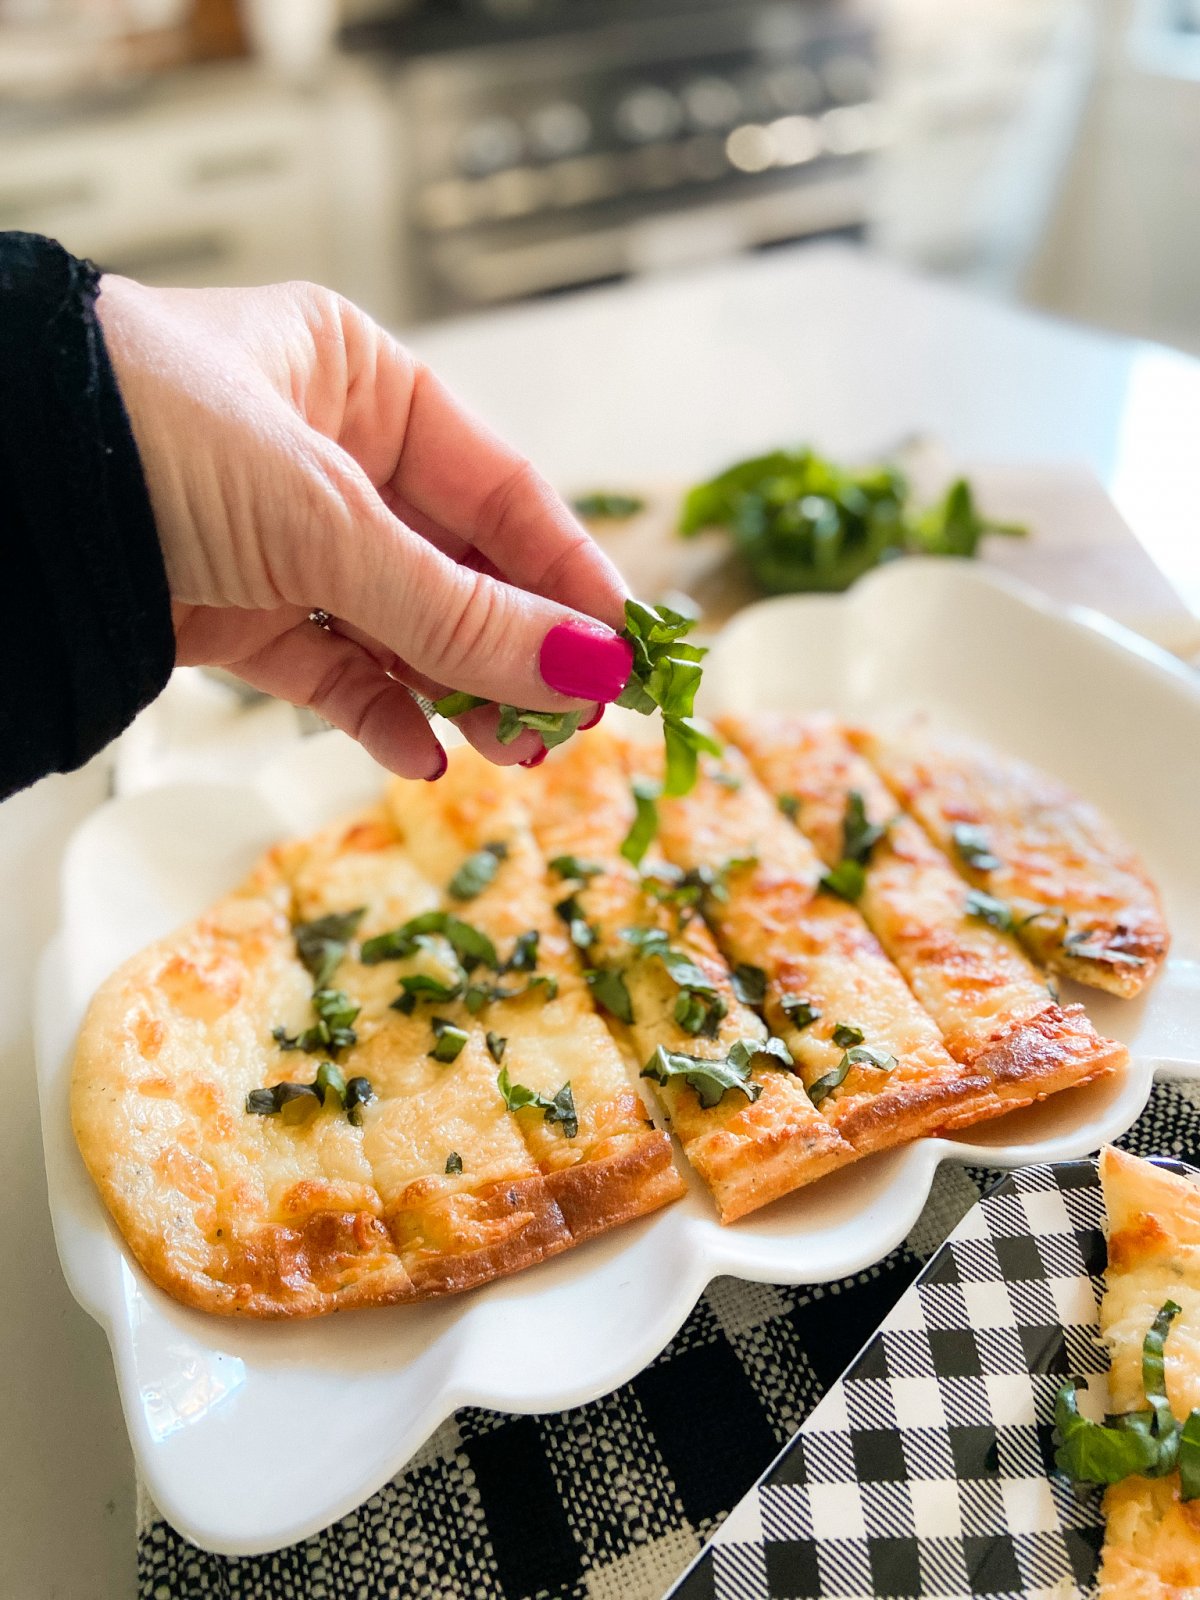 The Easiest Cheesiest Keto Breadsticks. Make these low-carb cheesy, flavorful breadsticks in under 30 minutes. Perfect on their own with marinara sauce or paired with a Keto soup or salad! 